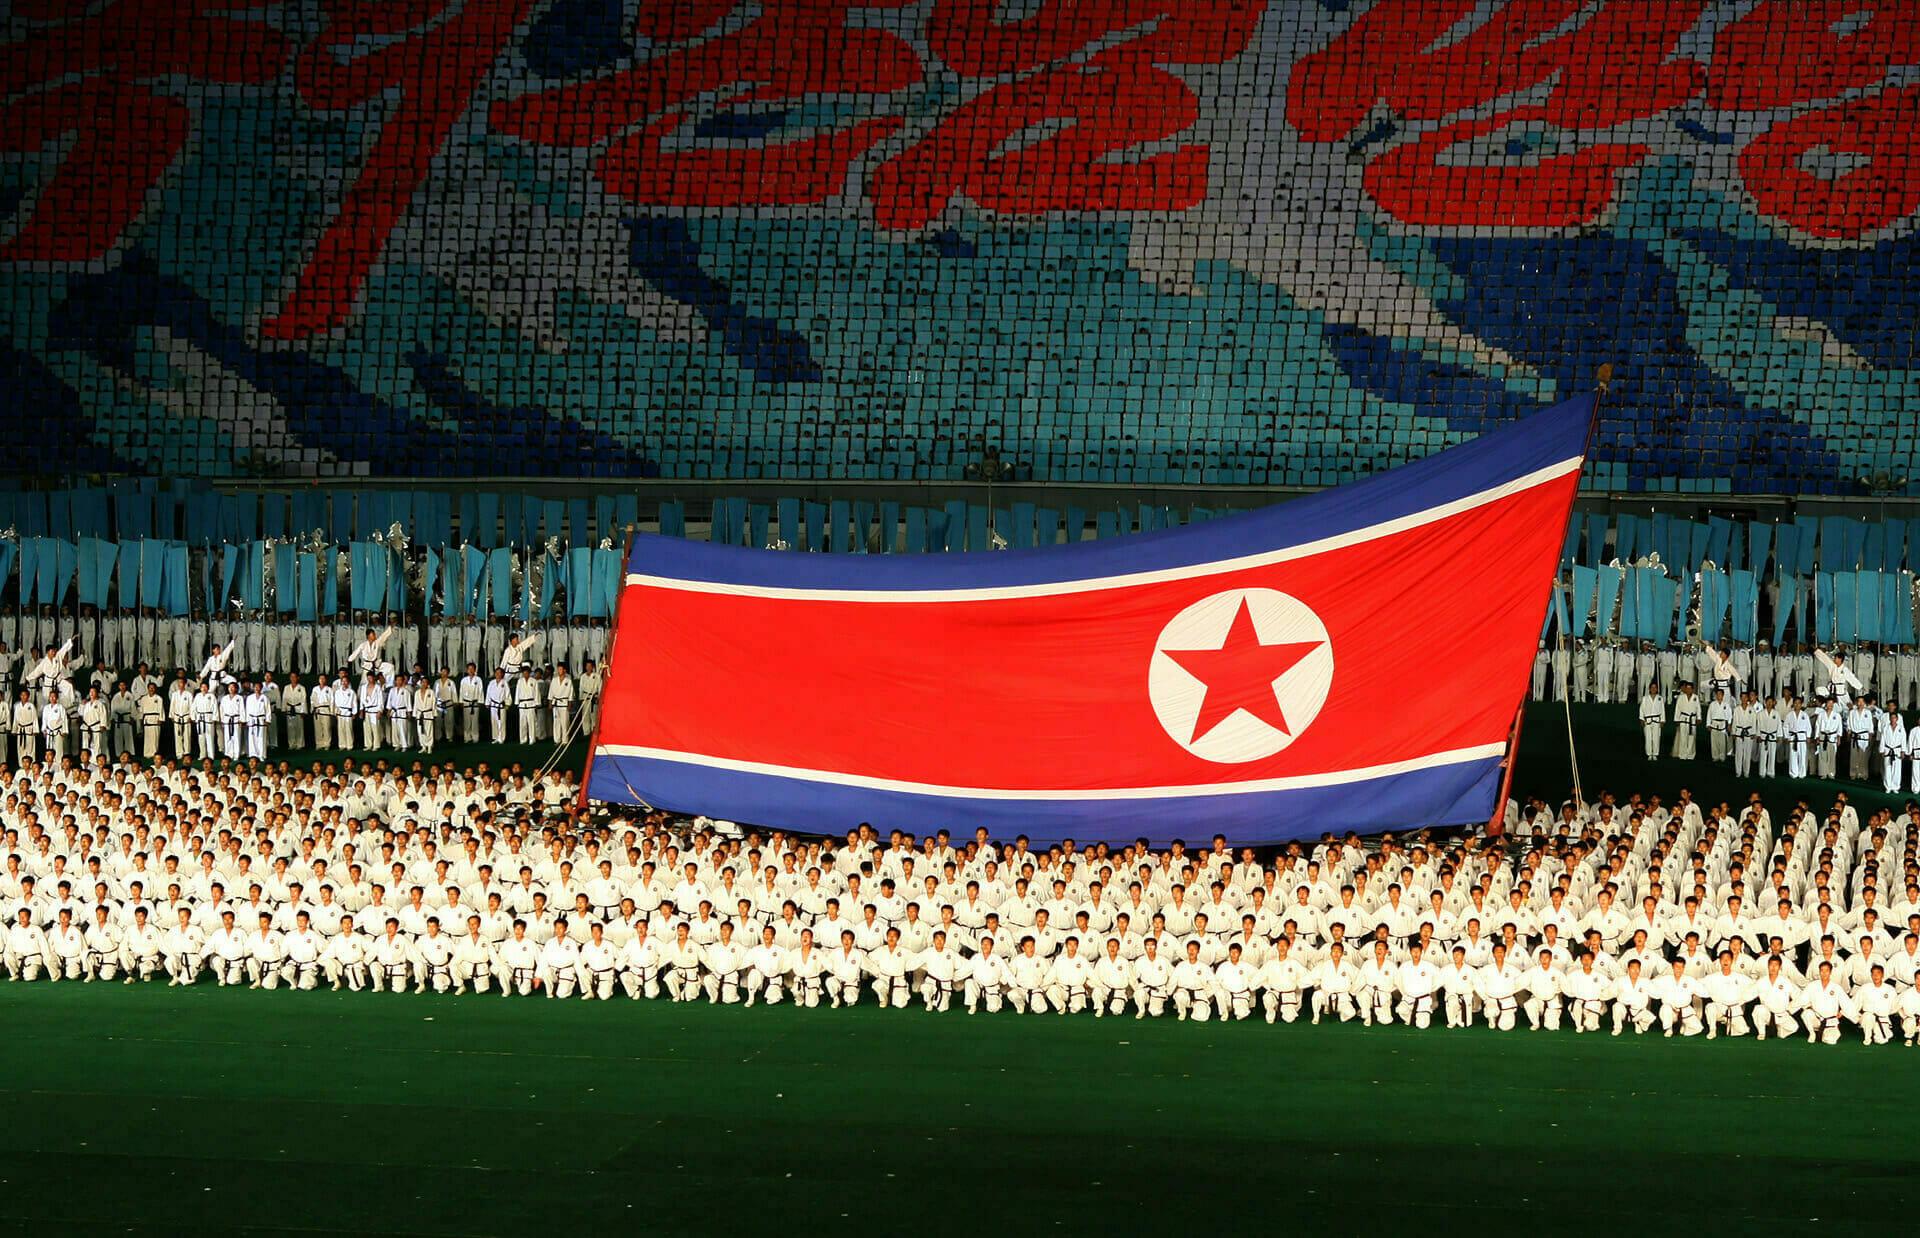 The Kimsuky APT group from North Korean has become notorious. Today’s columnist, Jeremy Leasher of Axellio, writes packet capture and analysis (PCAP) technology can help security teams combat APTs.  Photo by Roman Harak is licensed under CC BY-SA
2.0